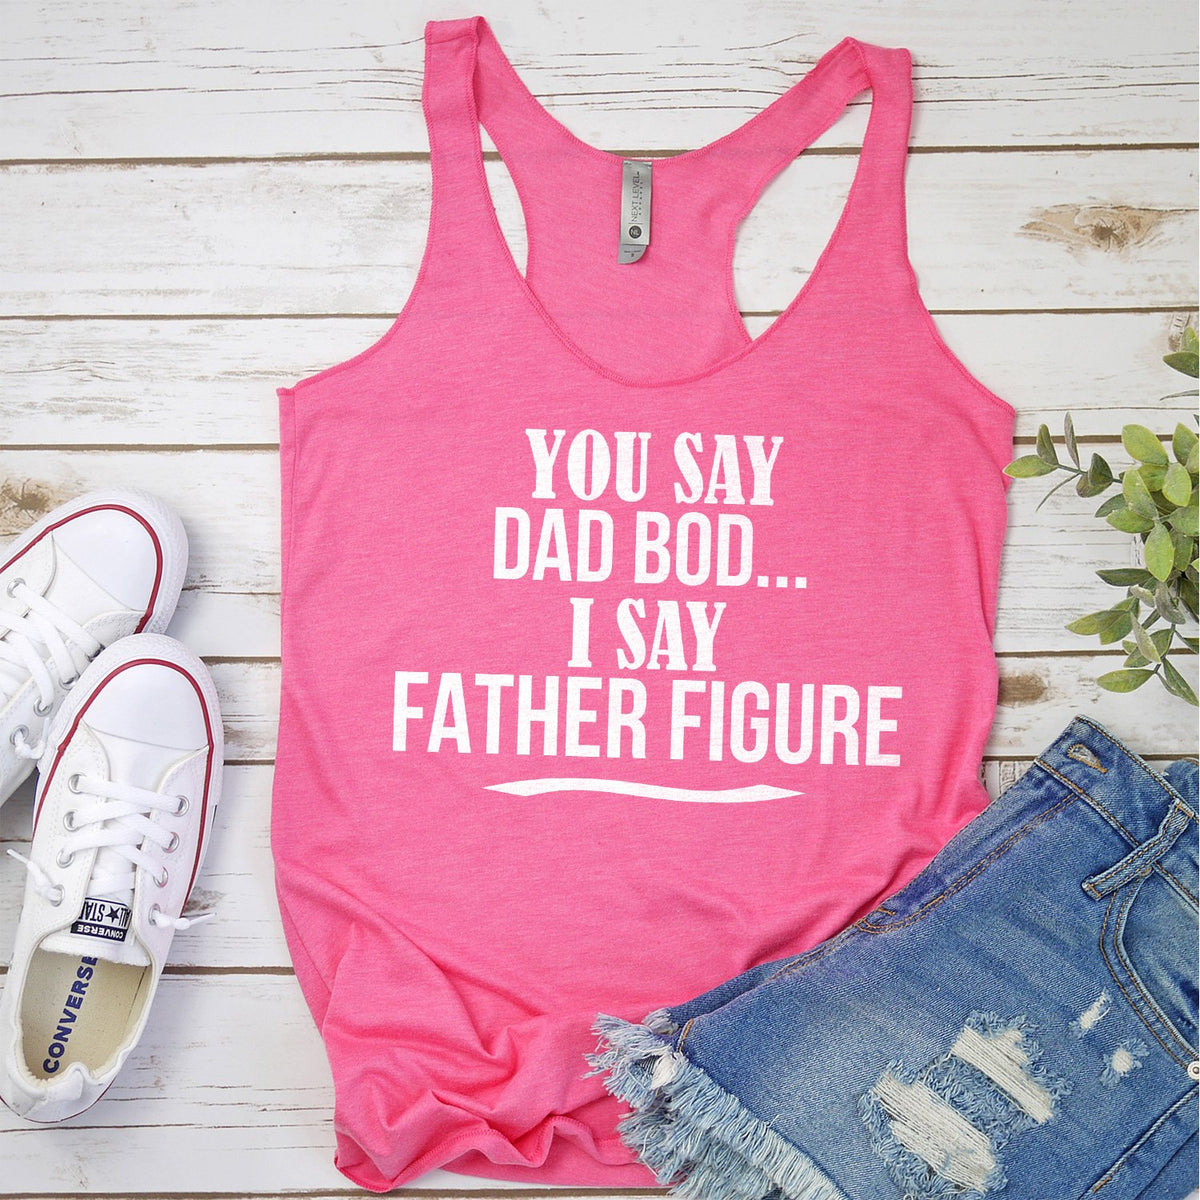 You Say Dad Bod I Say Father Figure - Tank Top Racerback